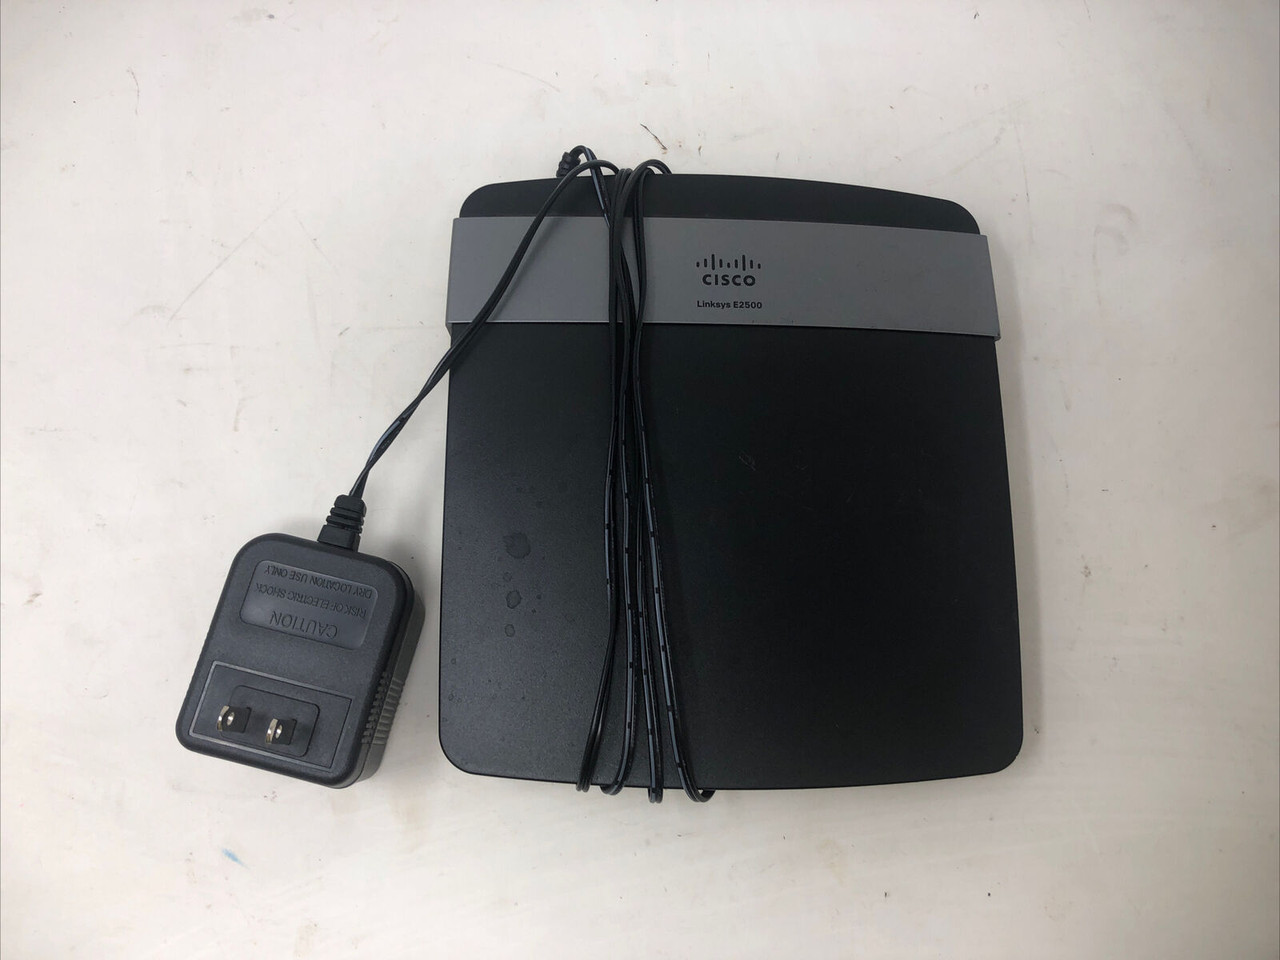 LINKSYS CISCO E2500 10/100 ETHERNET ROUTER - PREOWNED